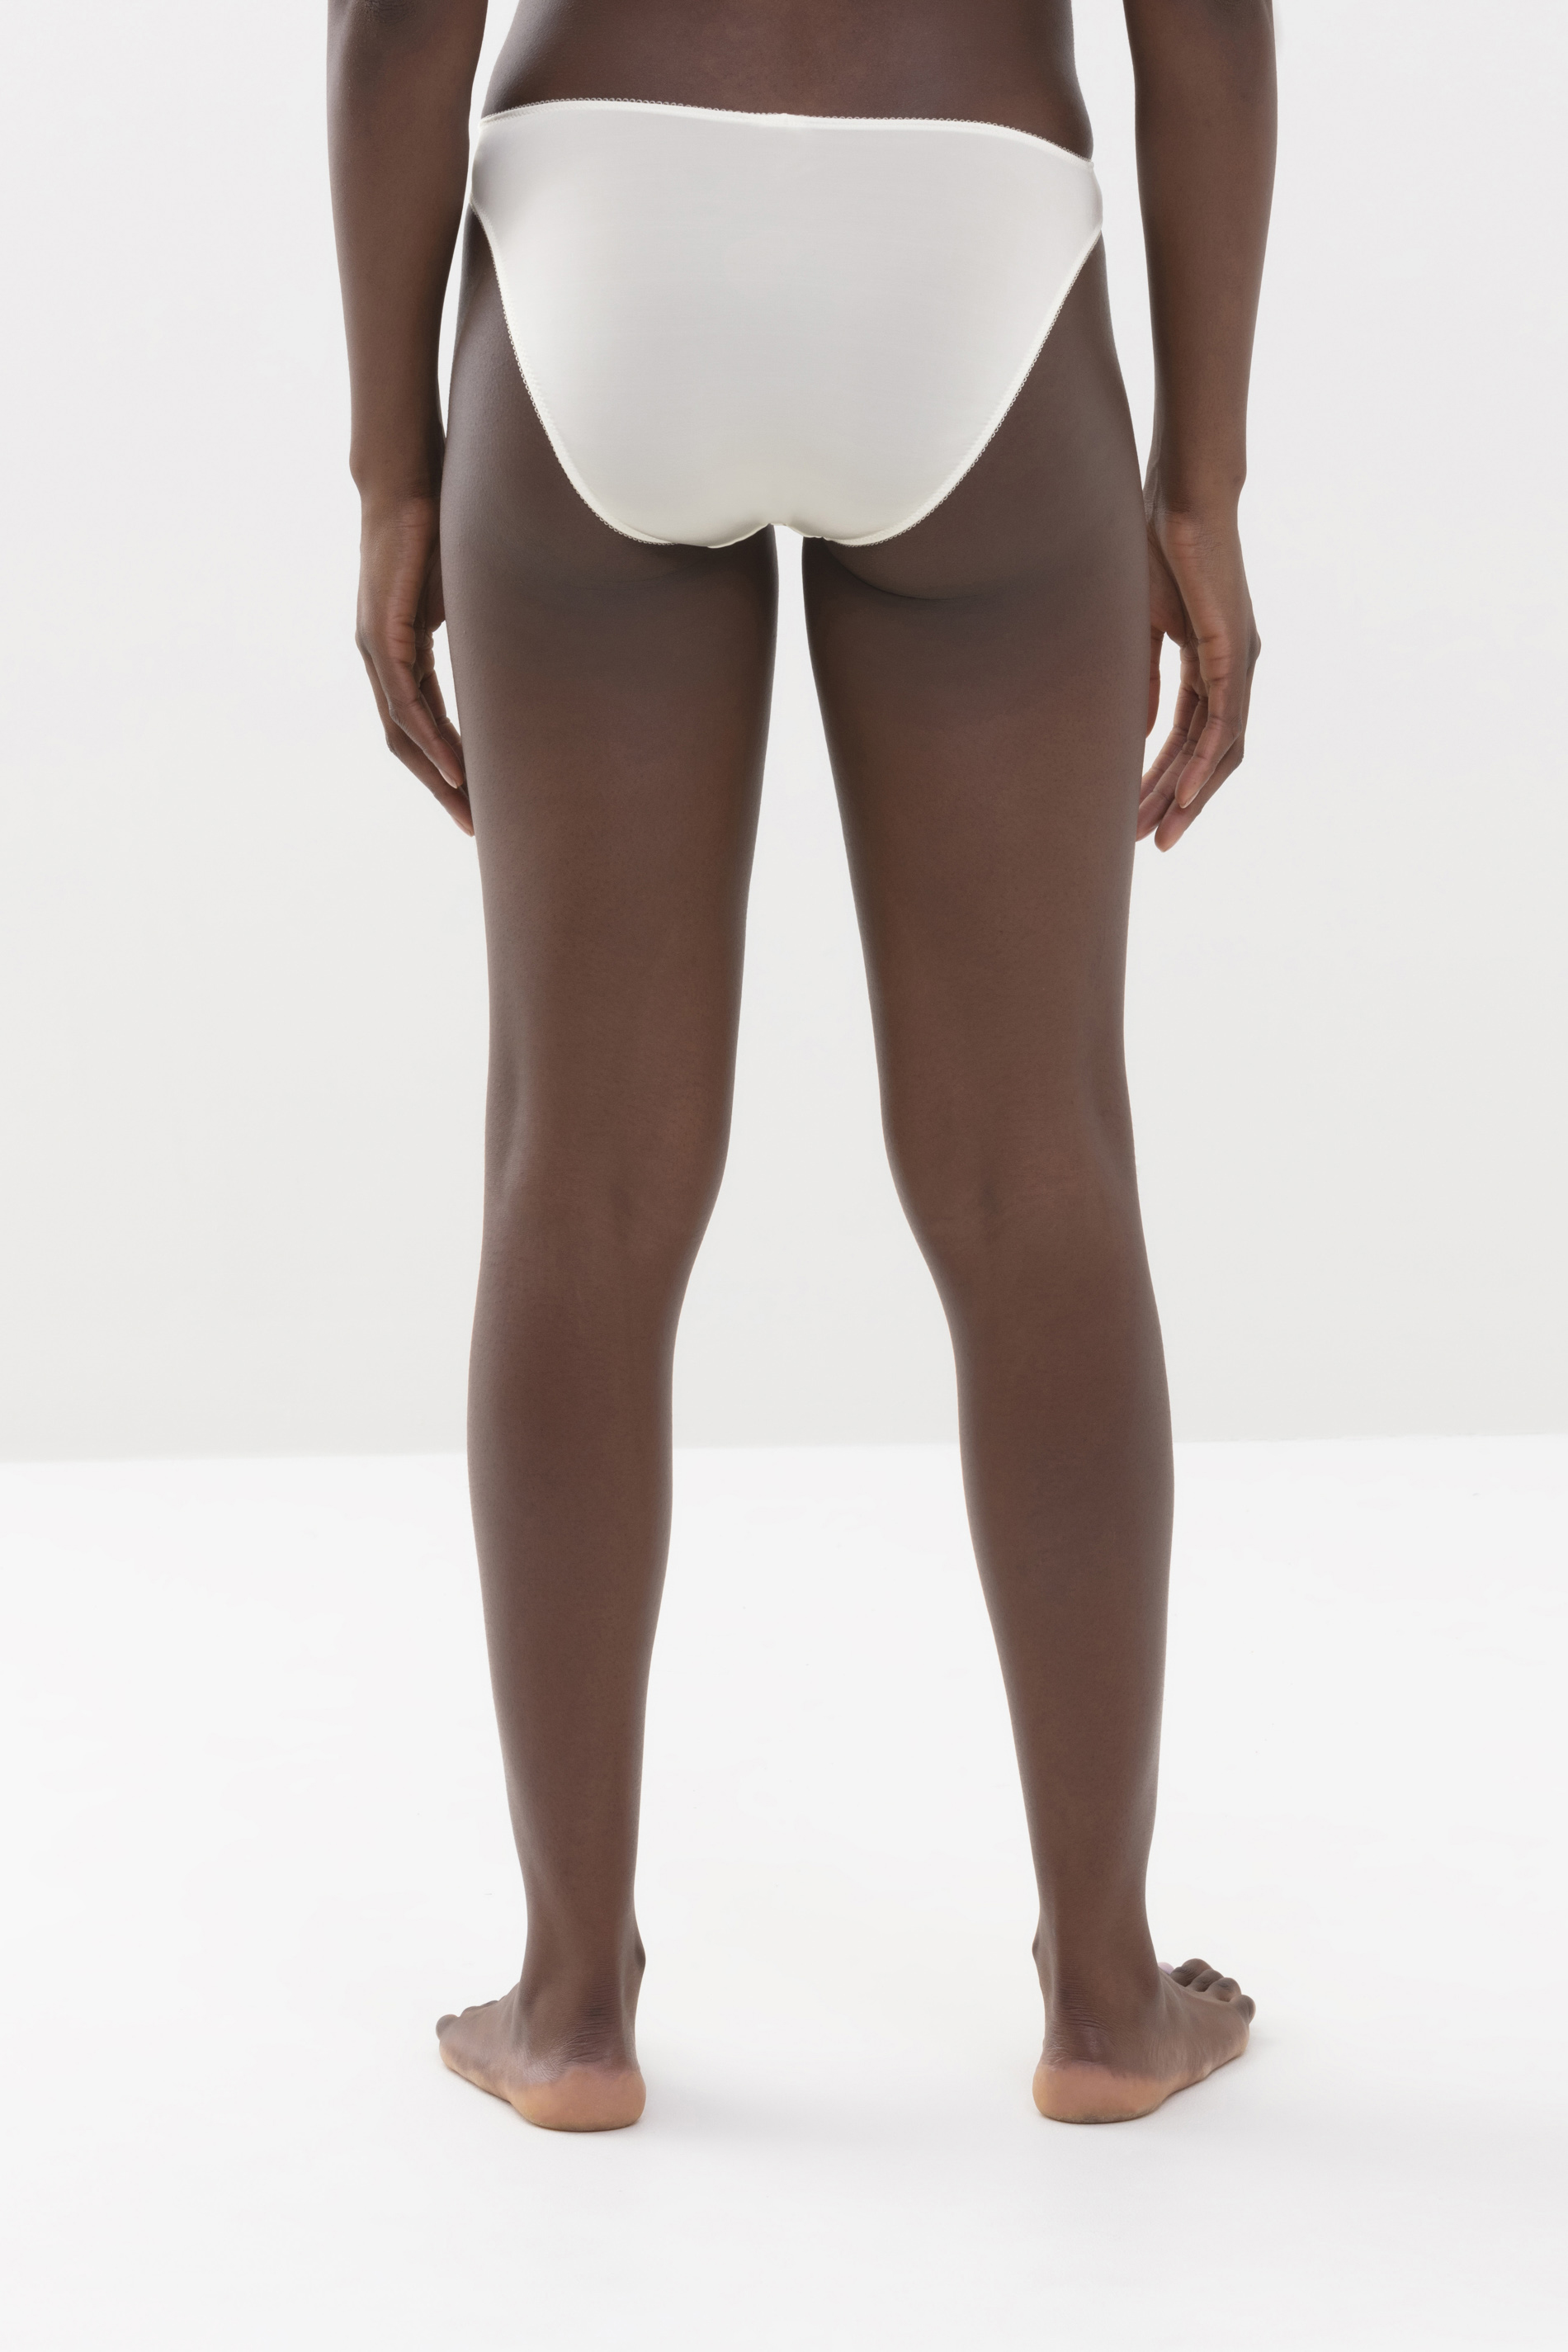 Retro jazz briefs Champagner Serie Poetry Classy Rear View | mey®